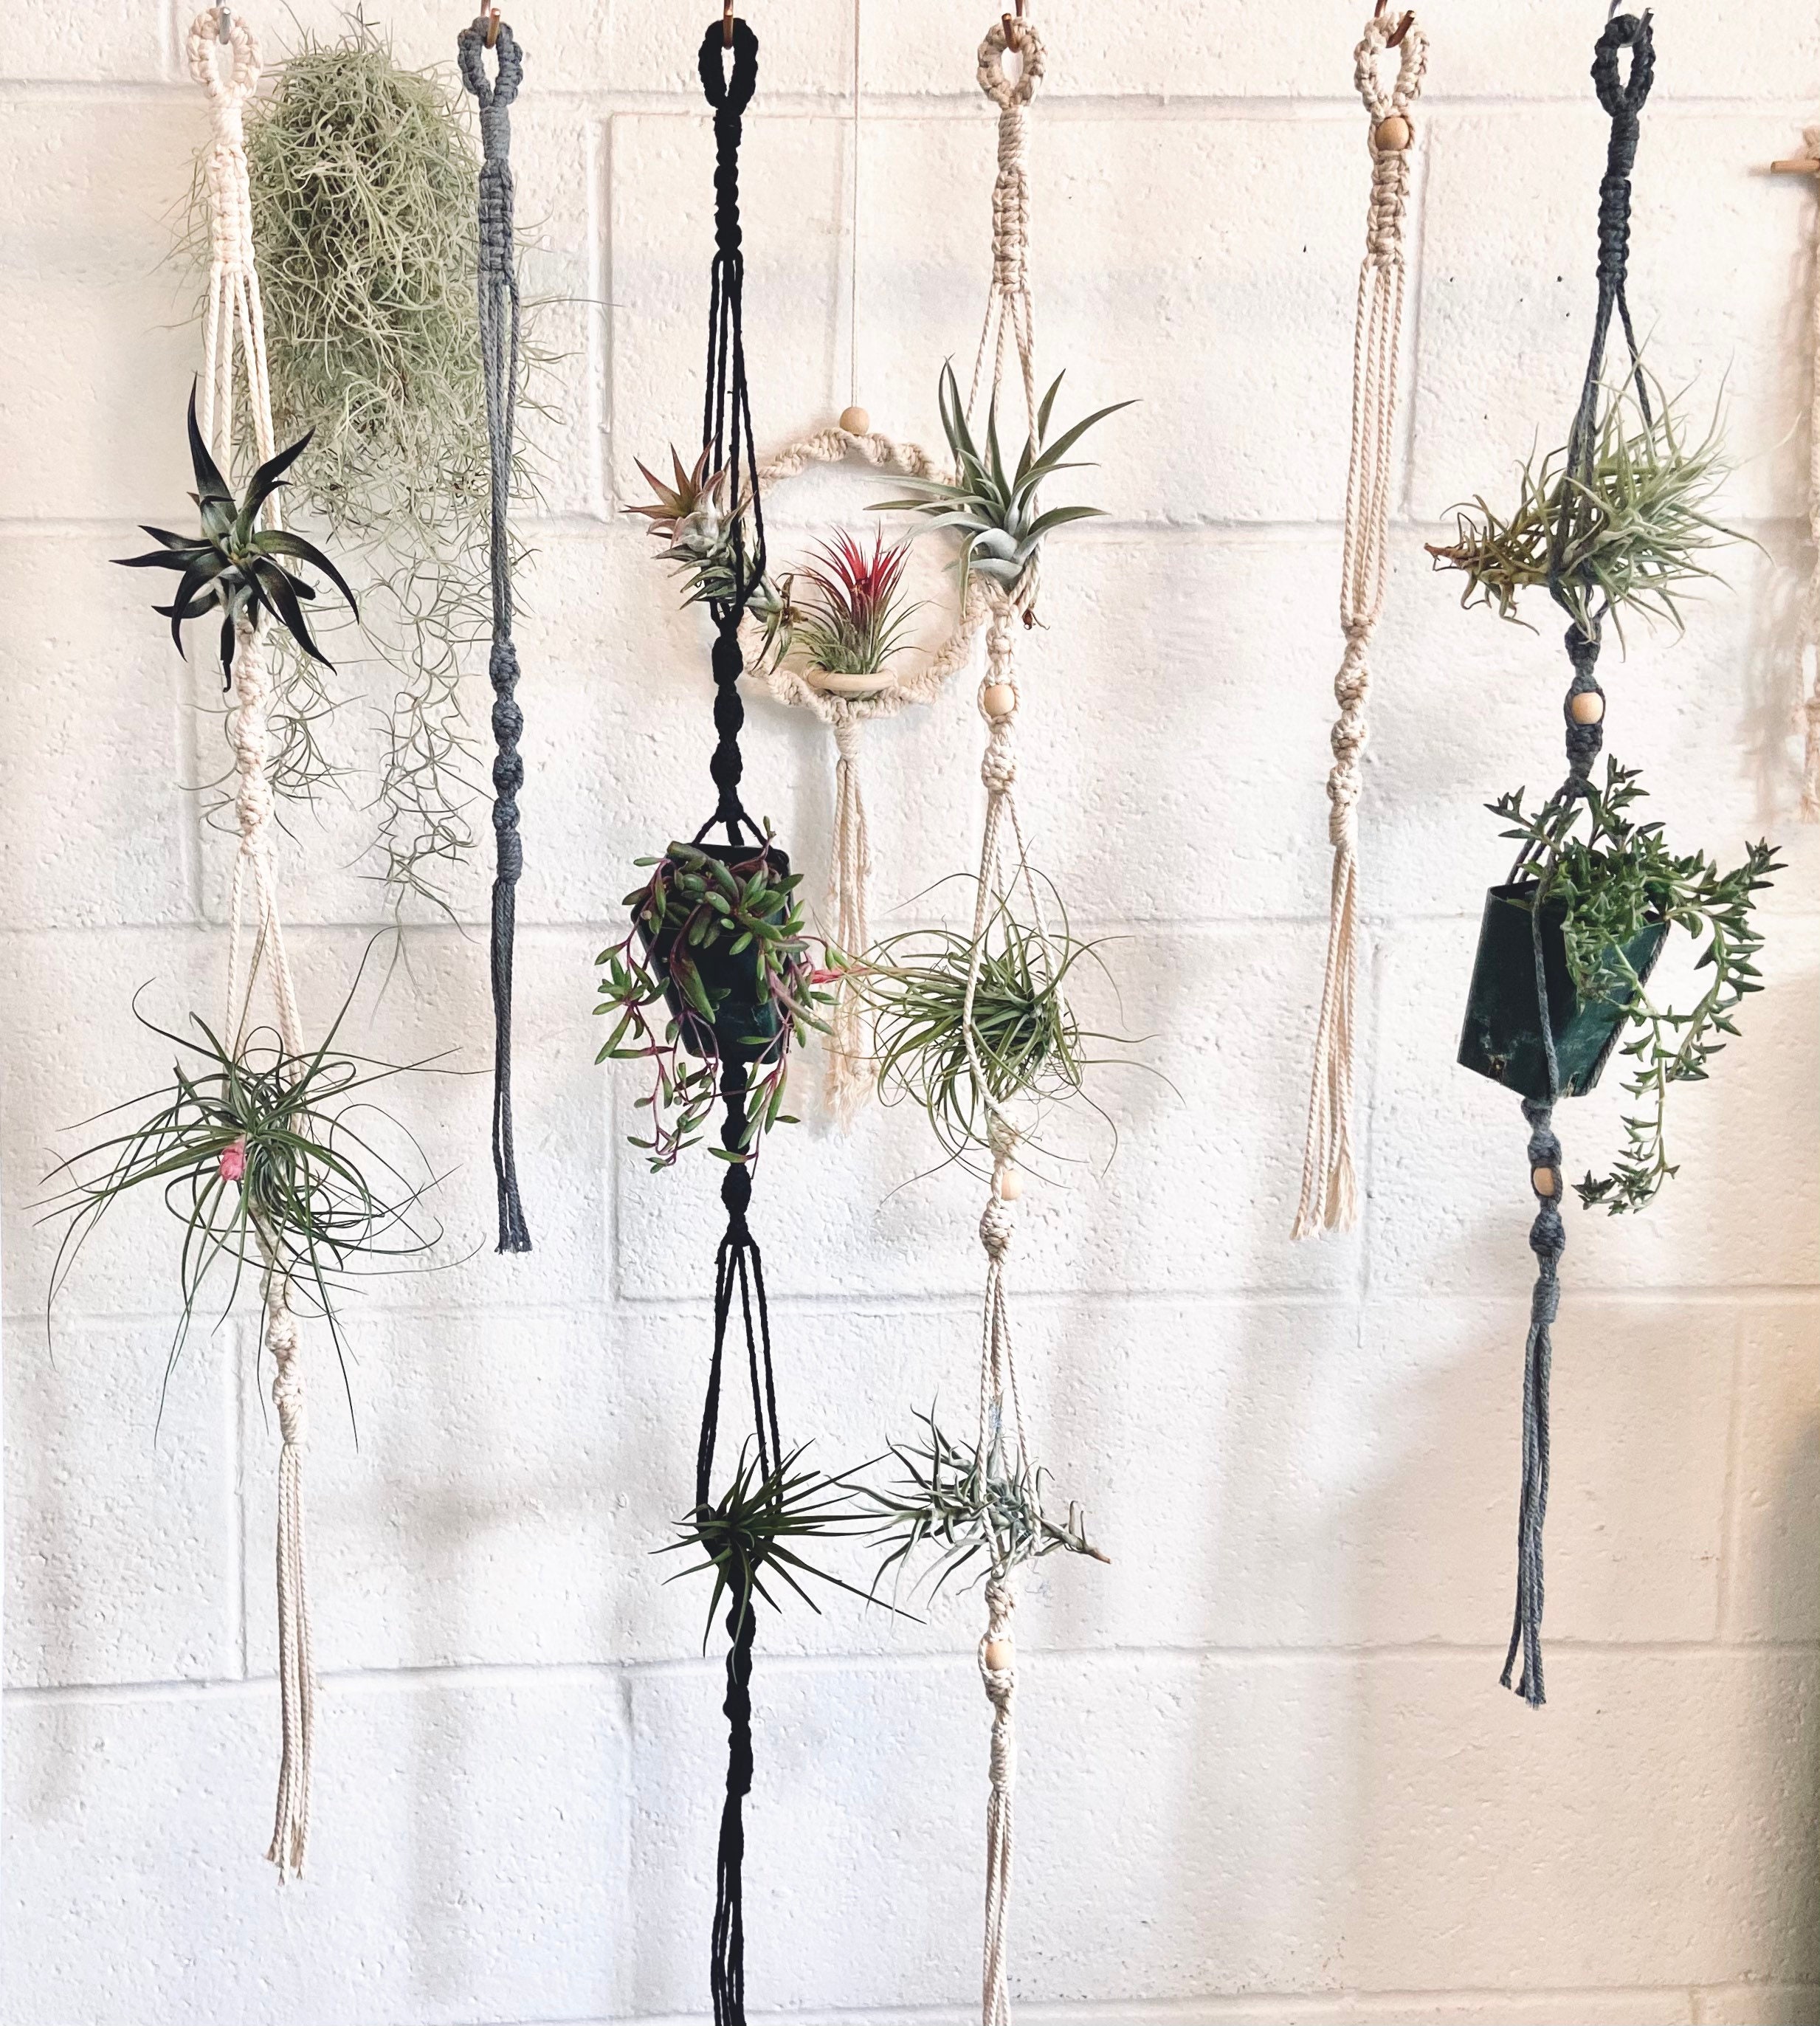 Dropship DIY Macrame Small Air Plant Hanger Kit to Sell Online at a Lower  Price